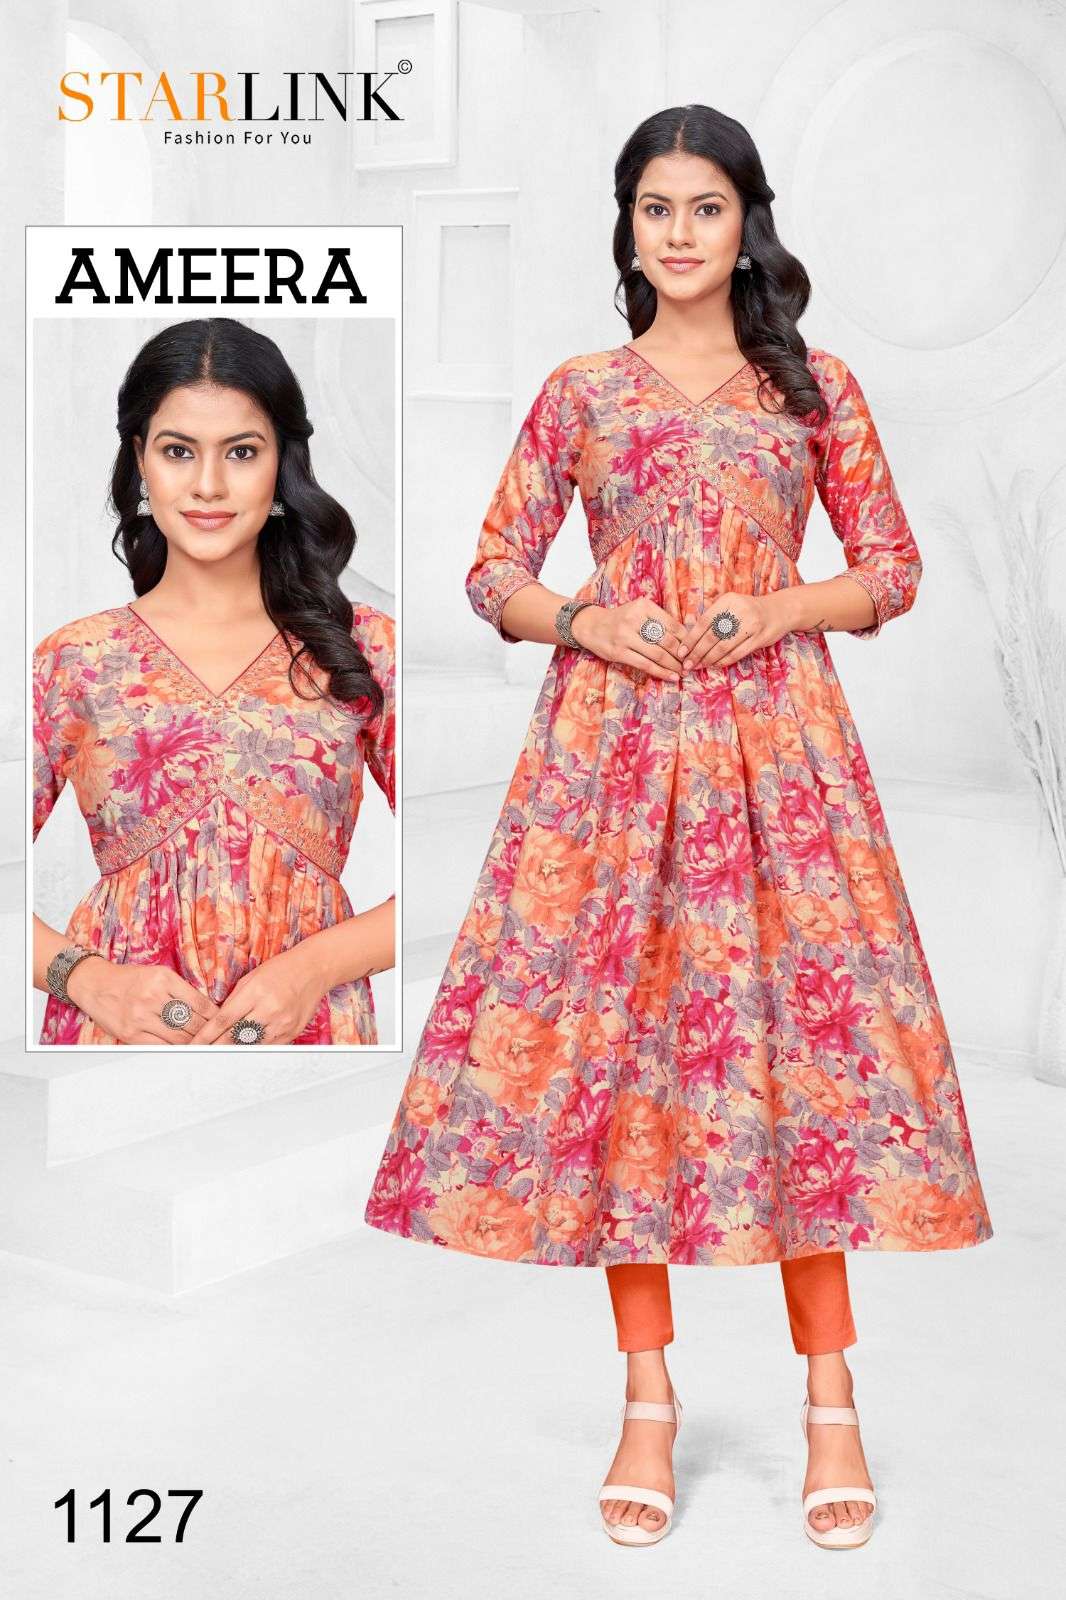 STARLINK AMEERA 2 NEW HEAVY FANCY DESIGNER MODAL SILK FOIL WITH EMBRODIEY WORK ALIA CUT FLAIR KURTI FESTIVAL WEAR COLLECTION WHOLESALER